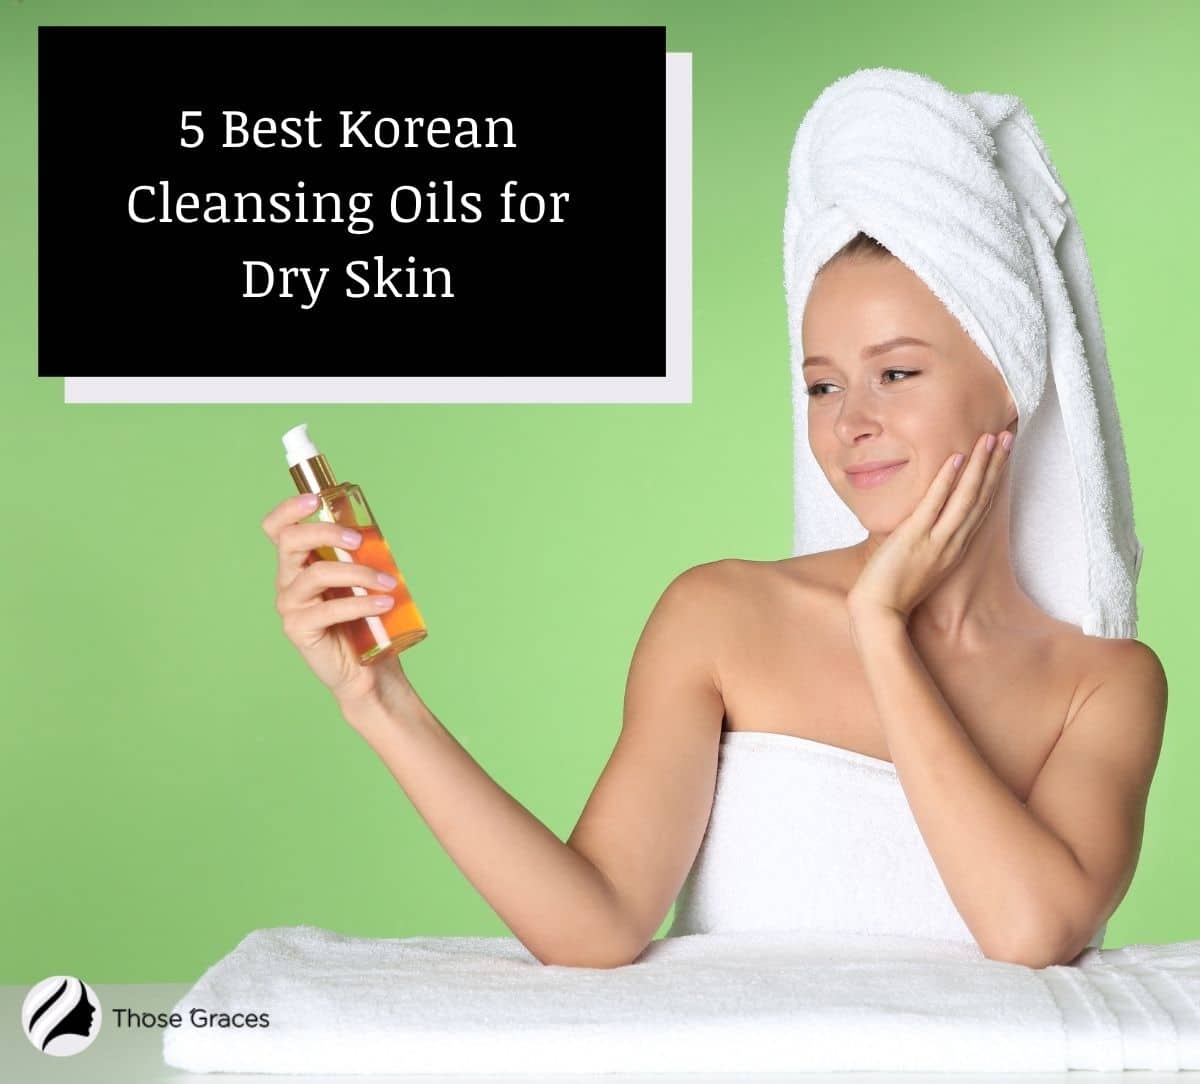 lady holding a bottle of the best Korean cleansing oil for dry skin